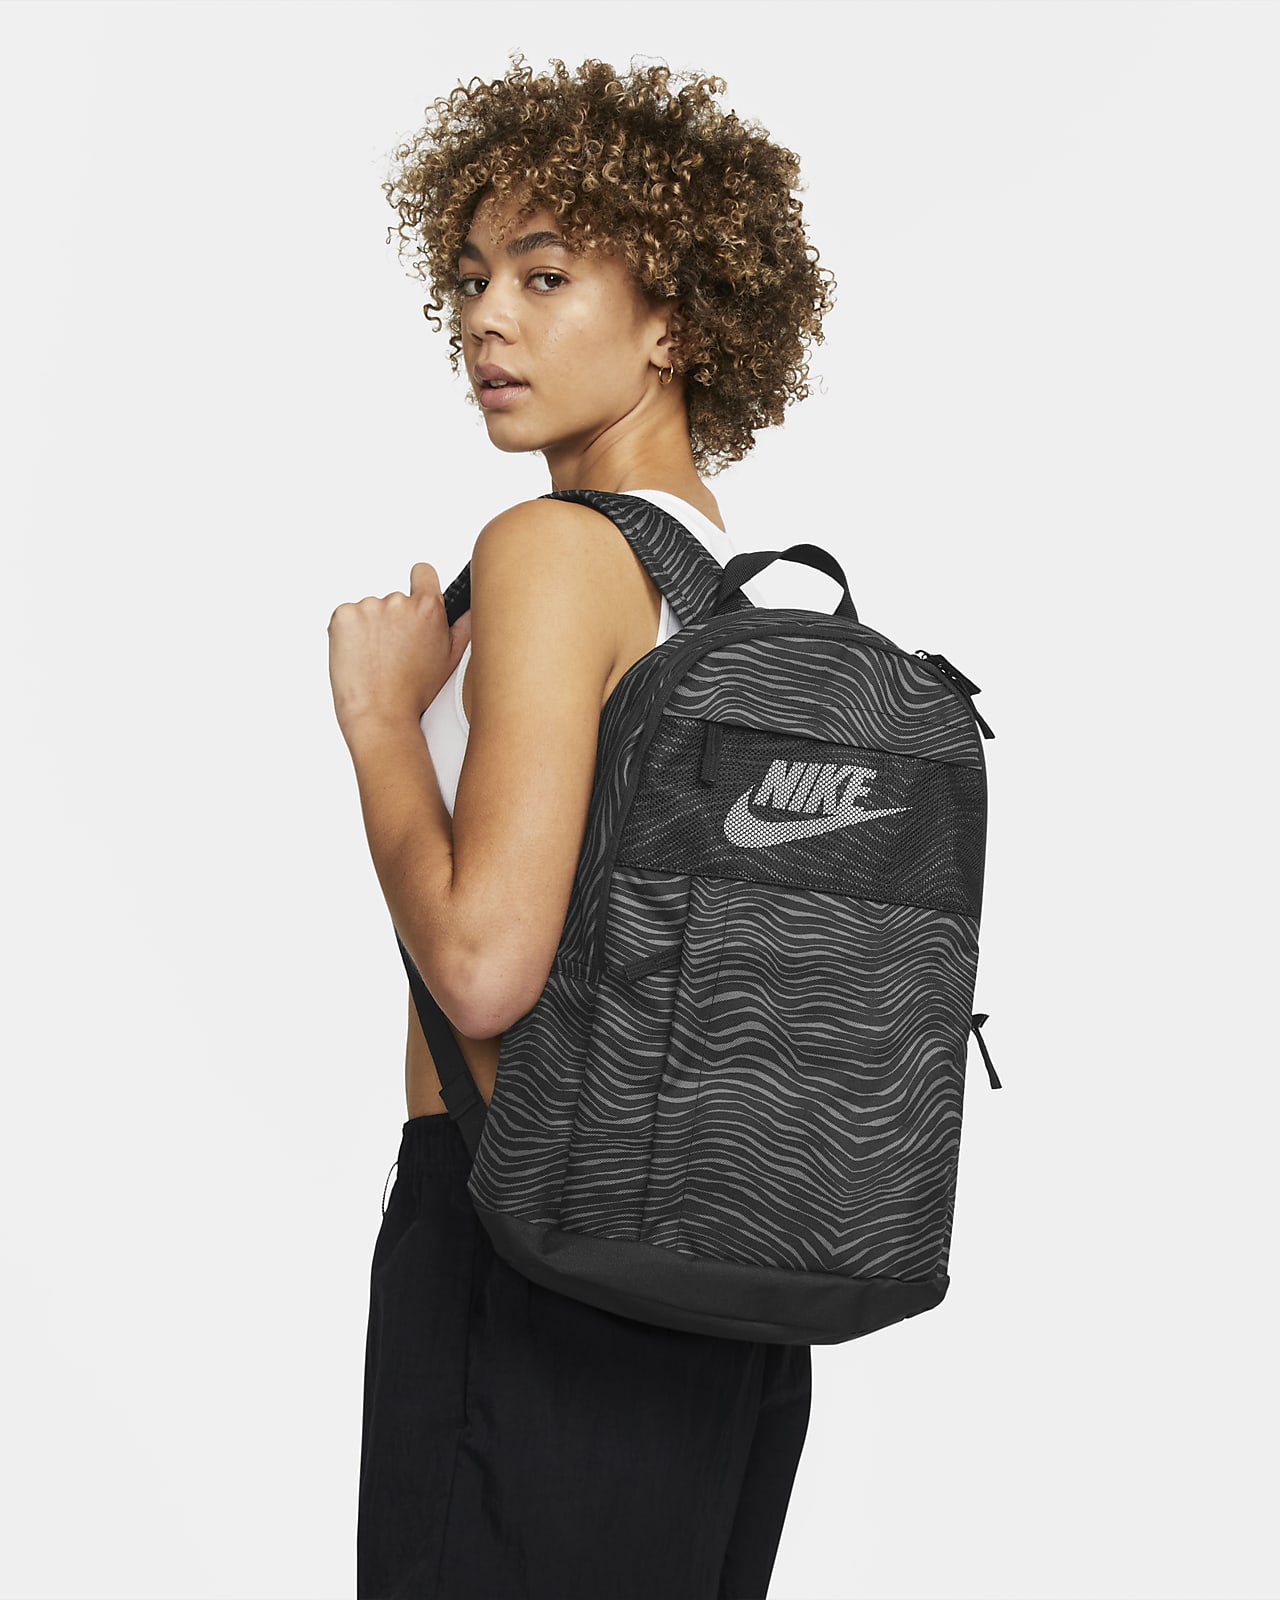 Nike Running Backpack, Men's Fashion, Activewear on Carousell